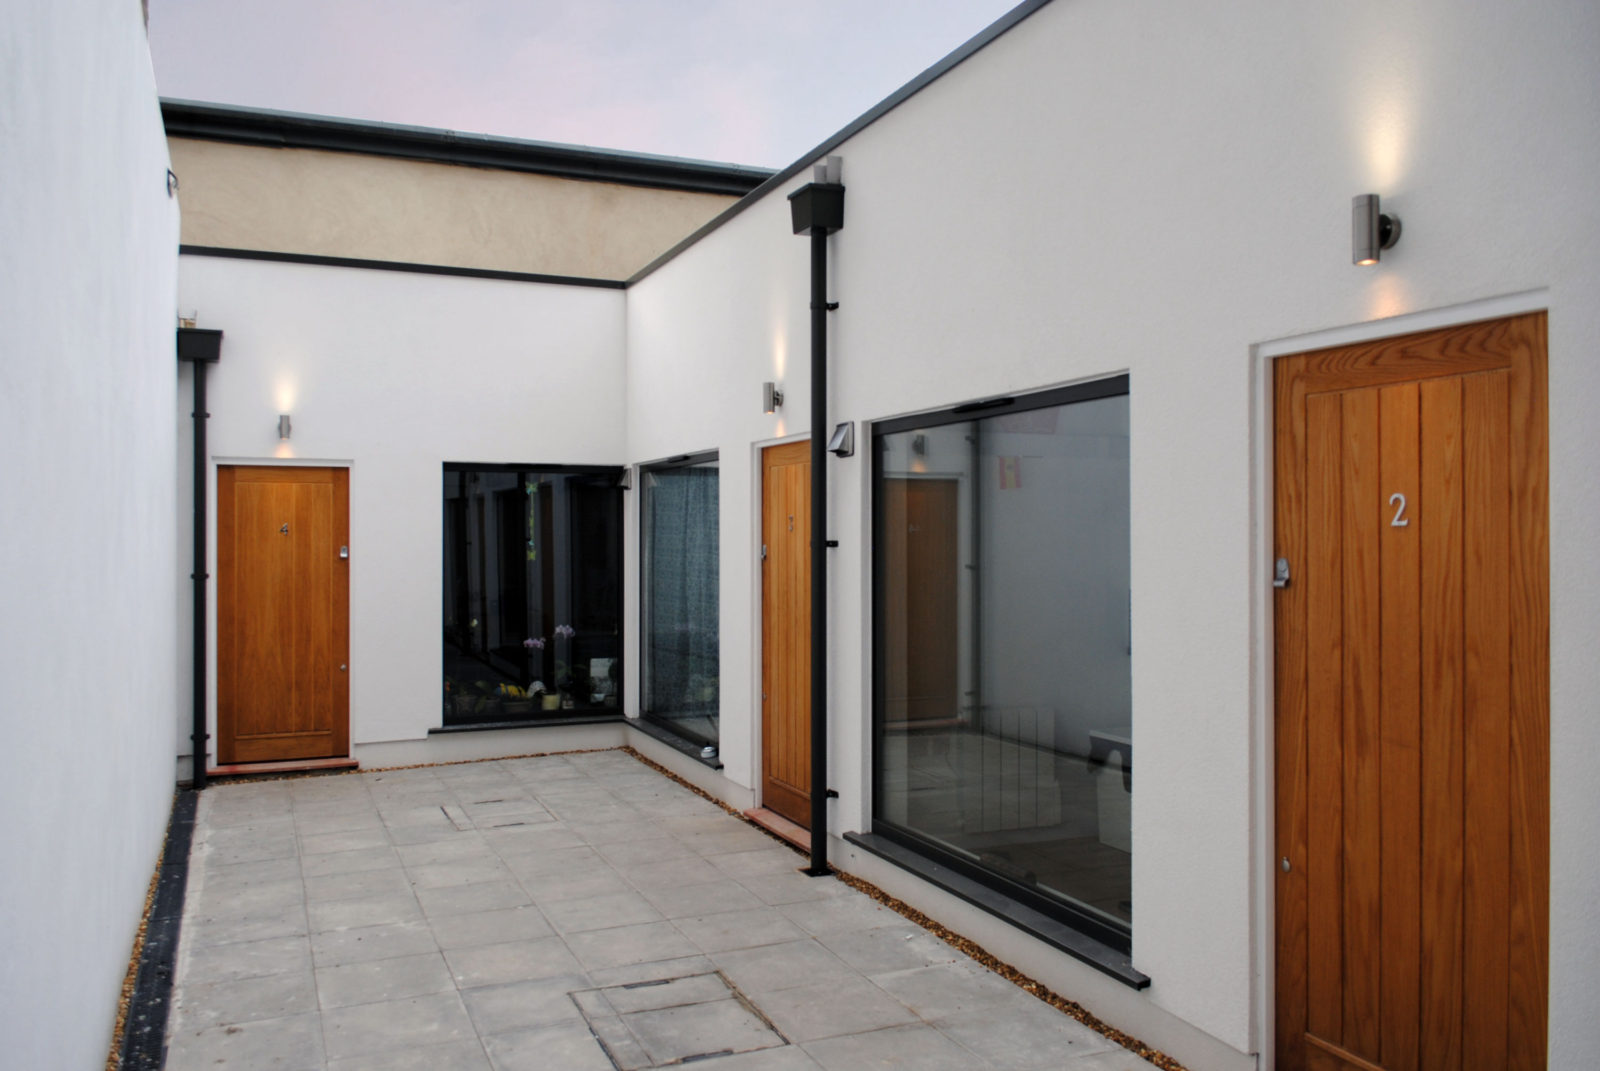 Image of private courtyard of development